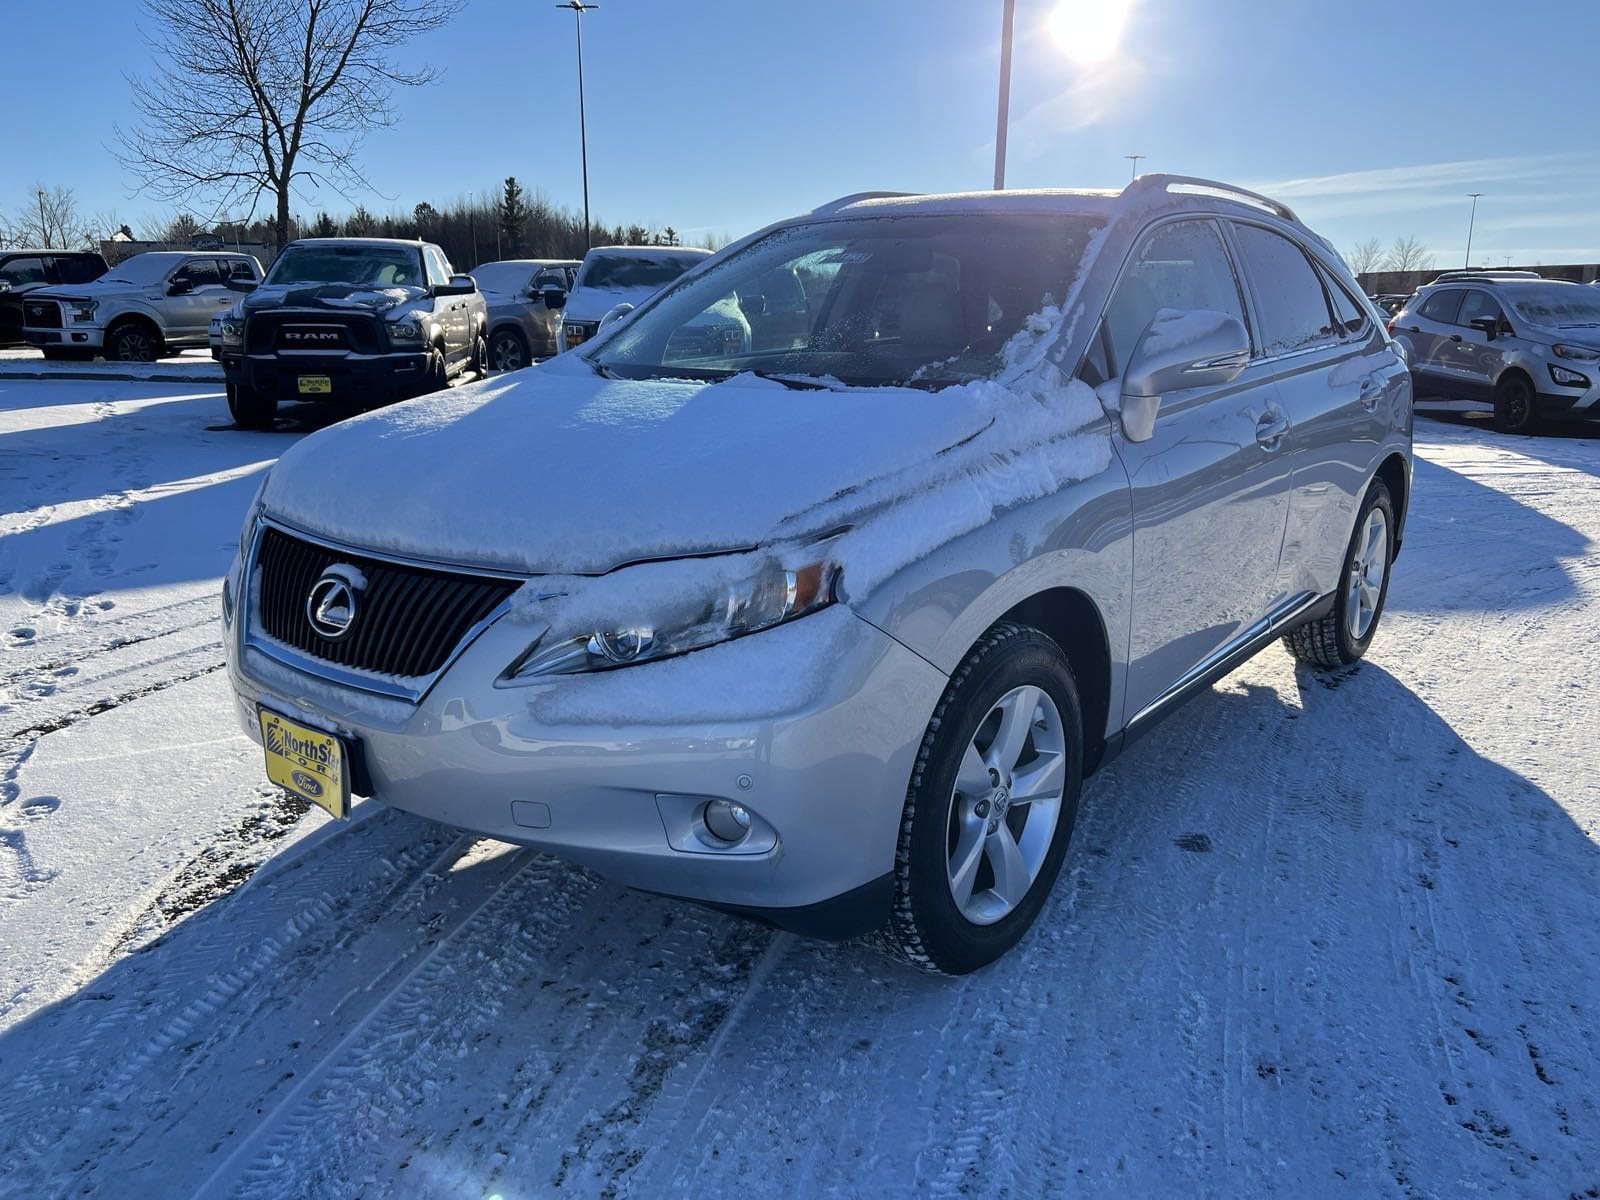 Used 2011 Lexus RX 350 with VIN 2T2BK1BA2BC087239 for sale in Minneapolis, Minnesota